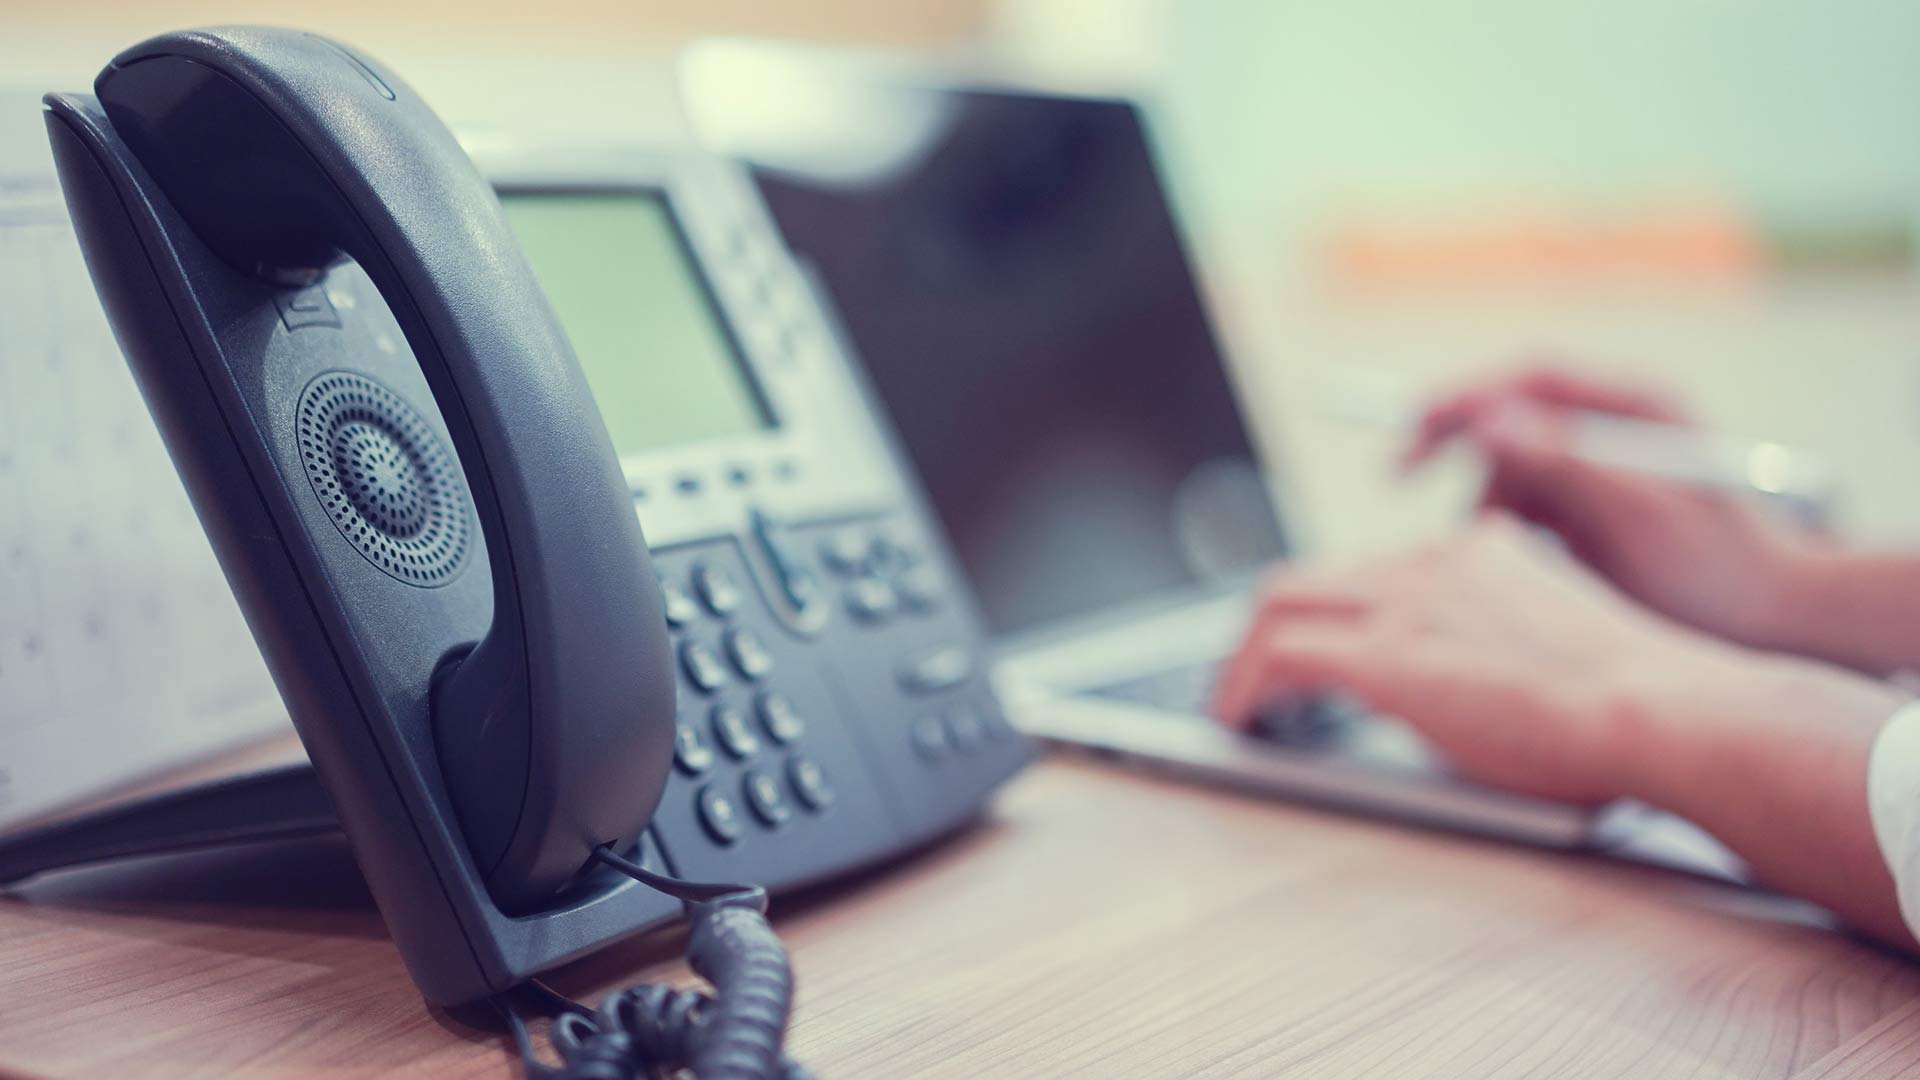 VoIP Headset: Types and Benefits